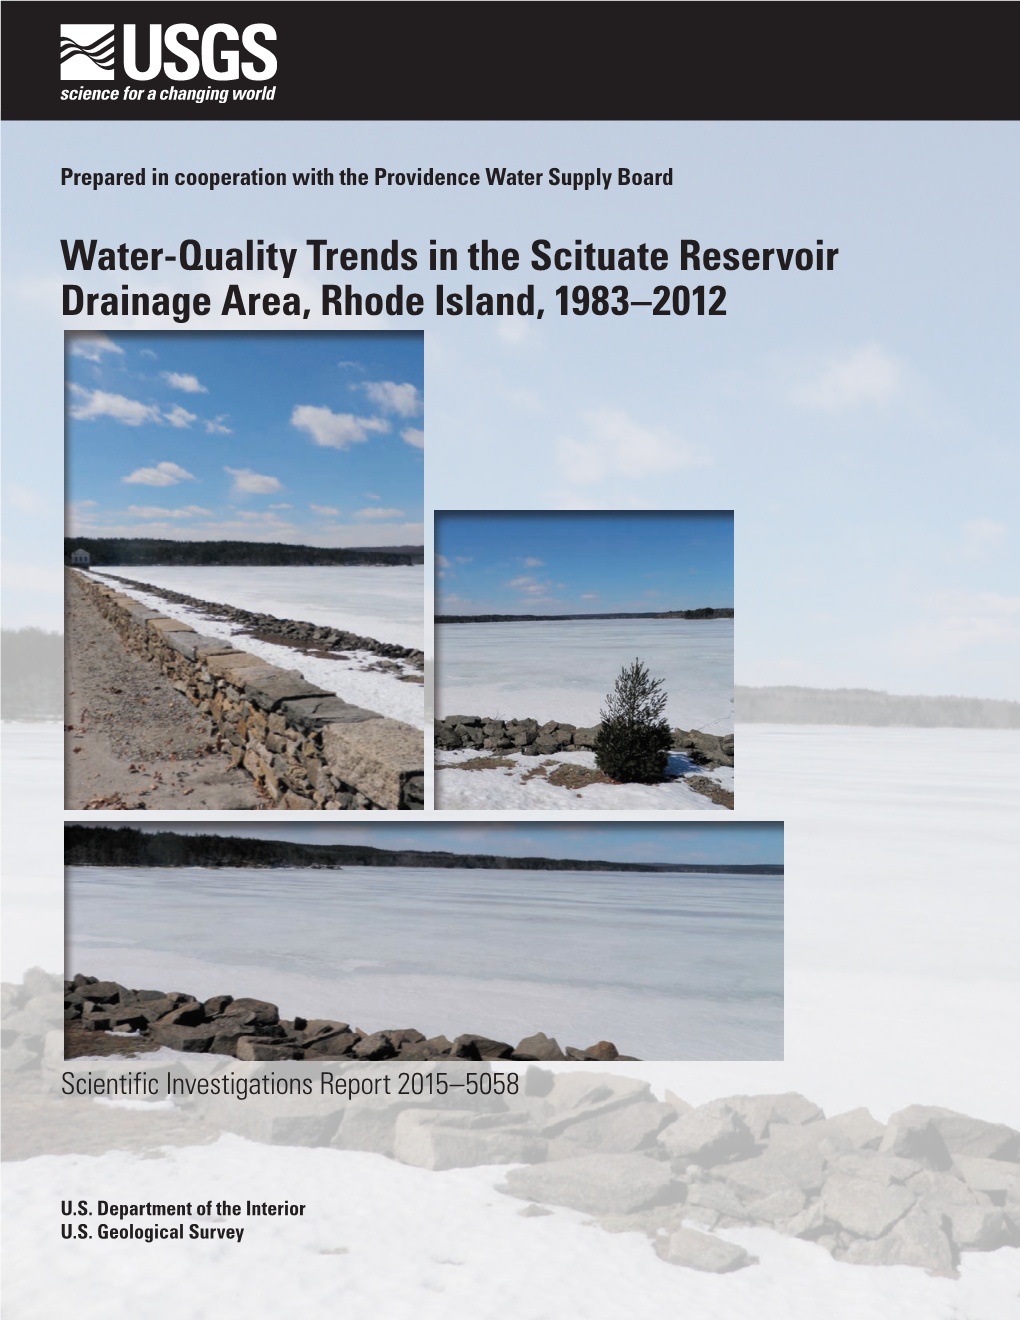 Water-Quality Trends in the Scituate Reservoir Drainage Area, Rhode Island, 1983–2012